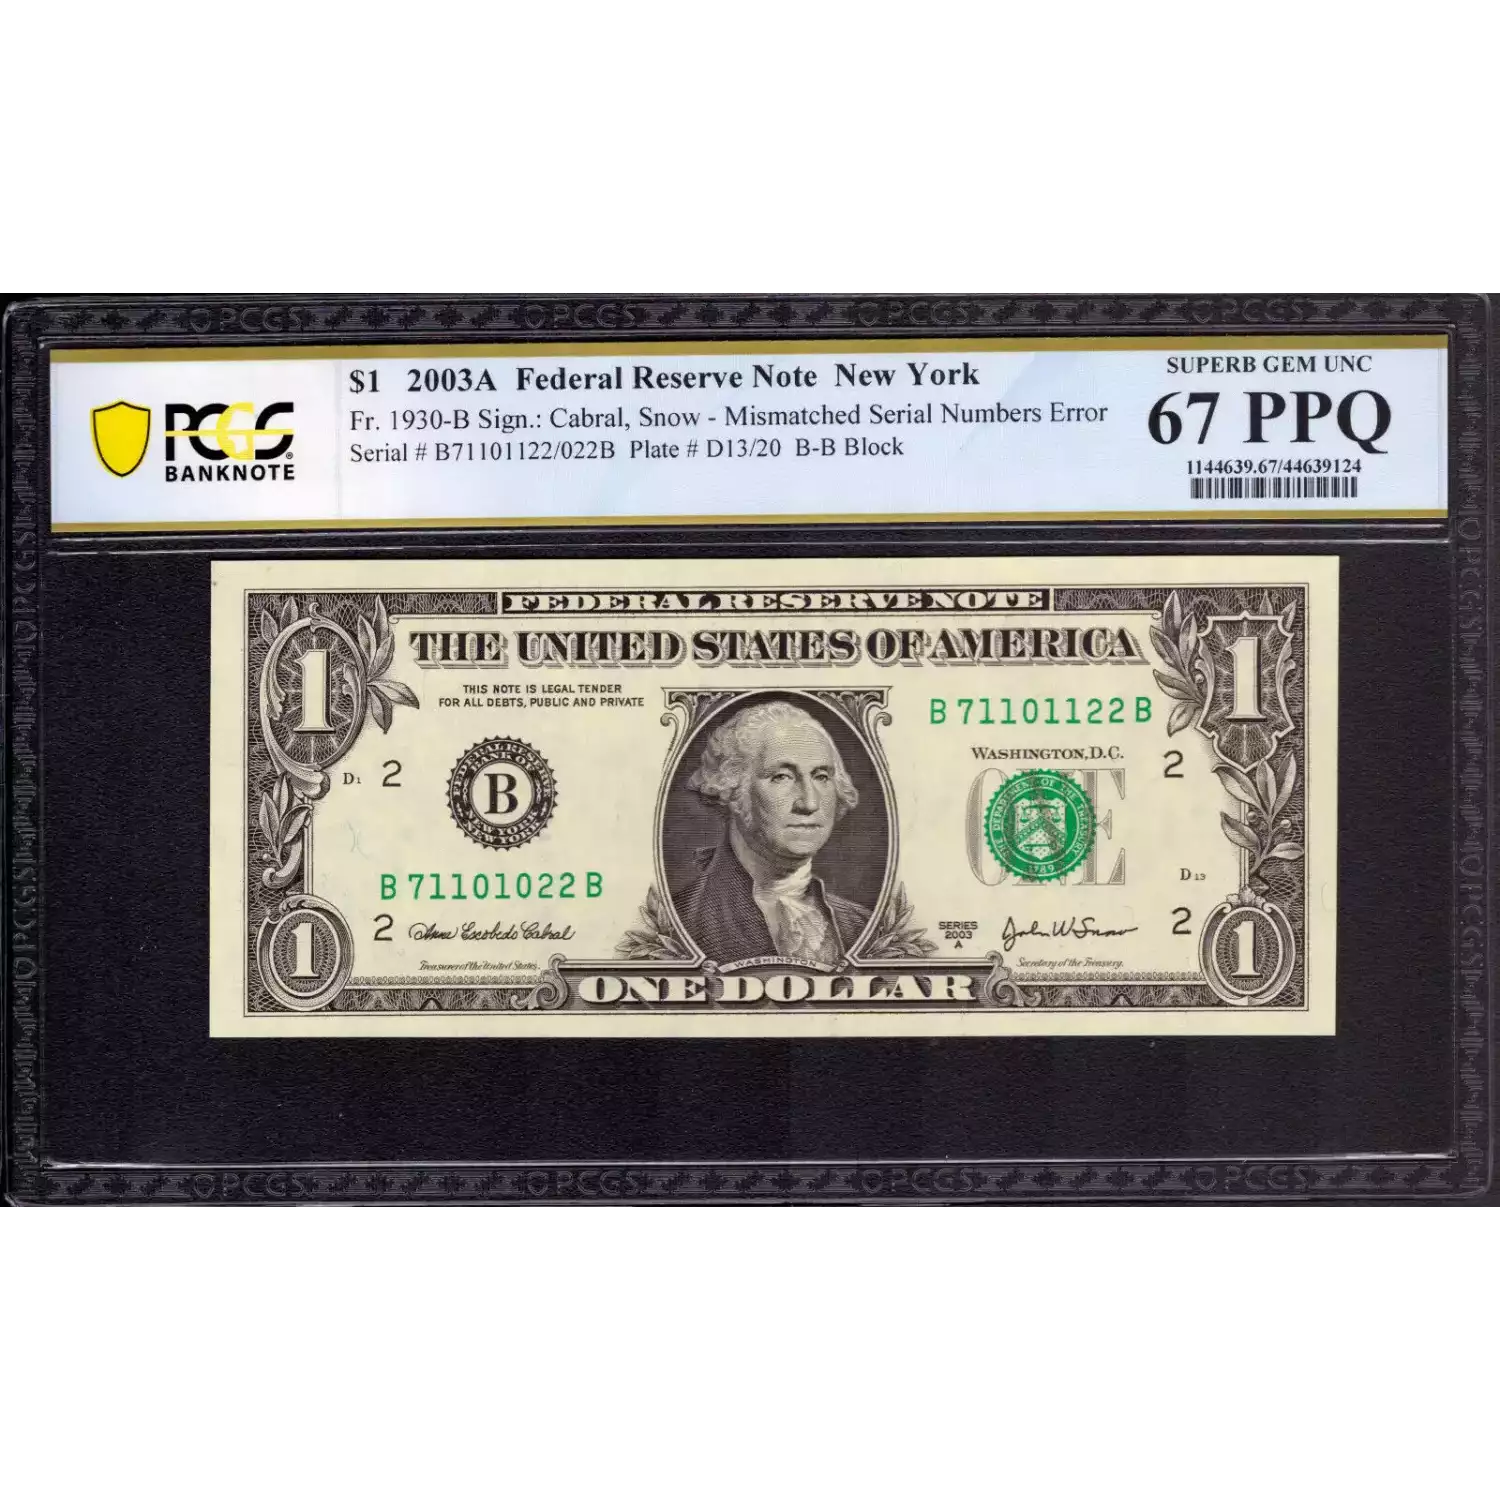 $1 2003-A. Green seal. Small Size $1 Federal Reserve Notes 1930-B